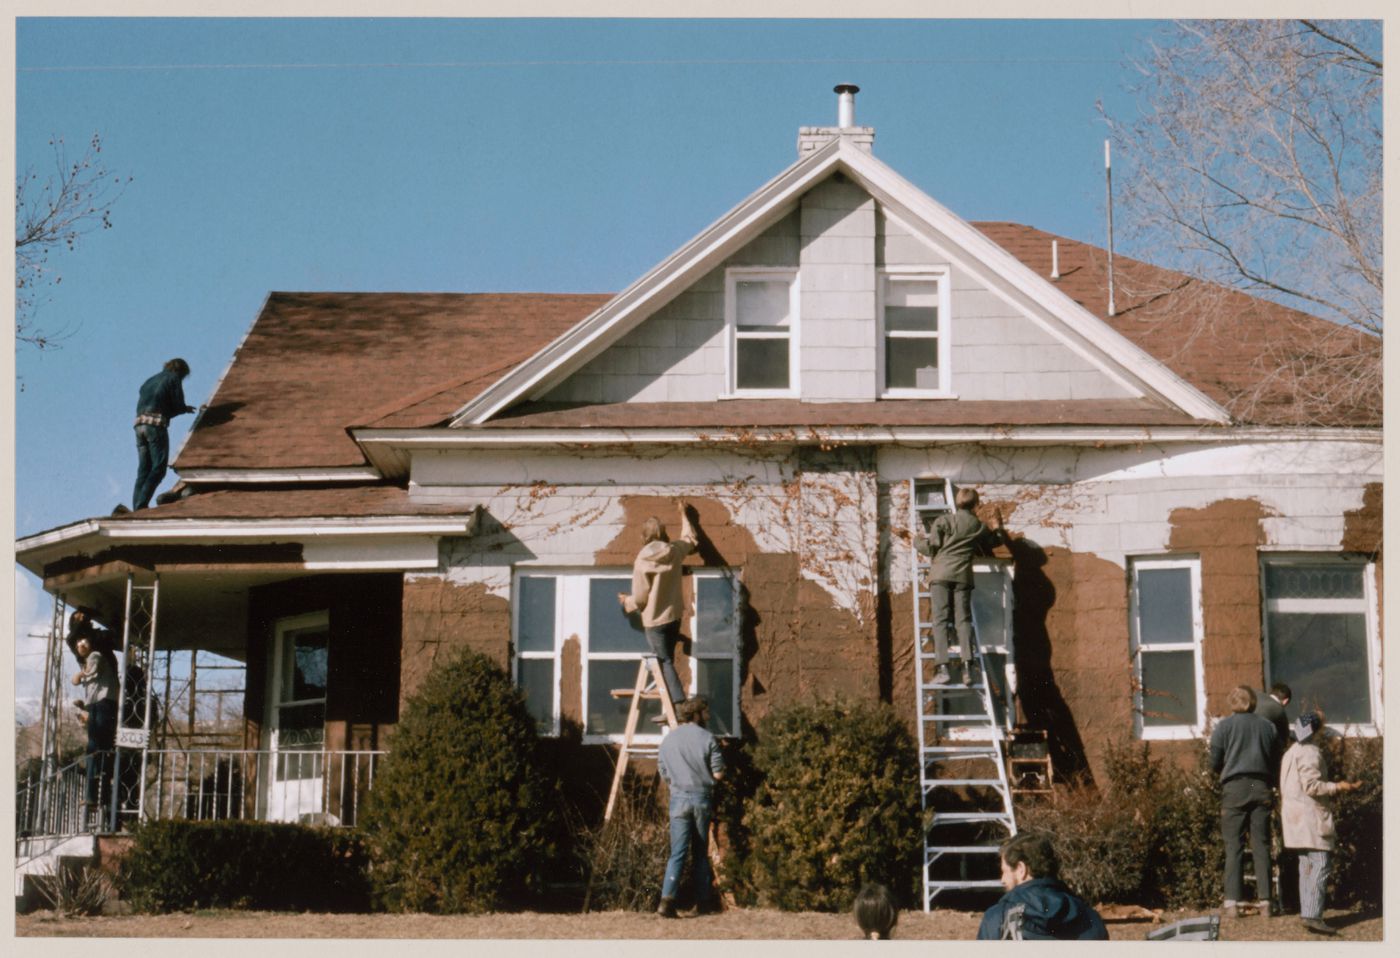 Photograph showing Pettena's team covering a house in clay for Clay House